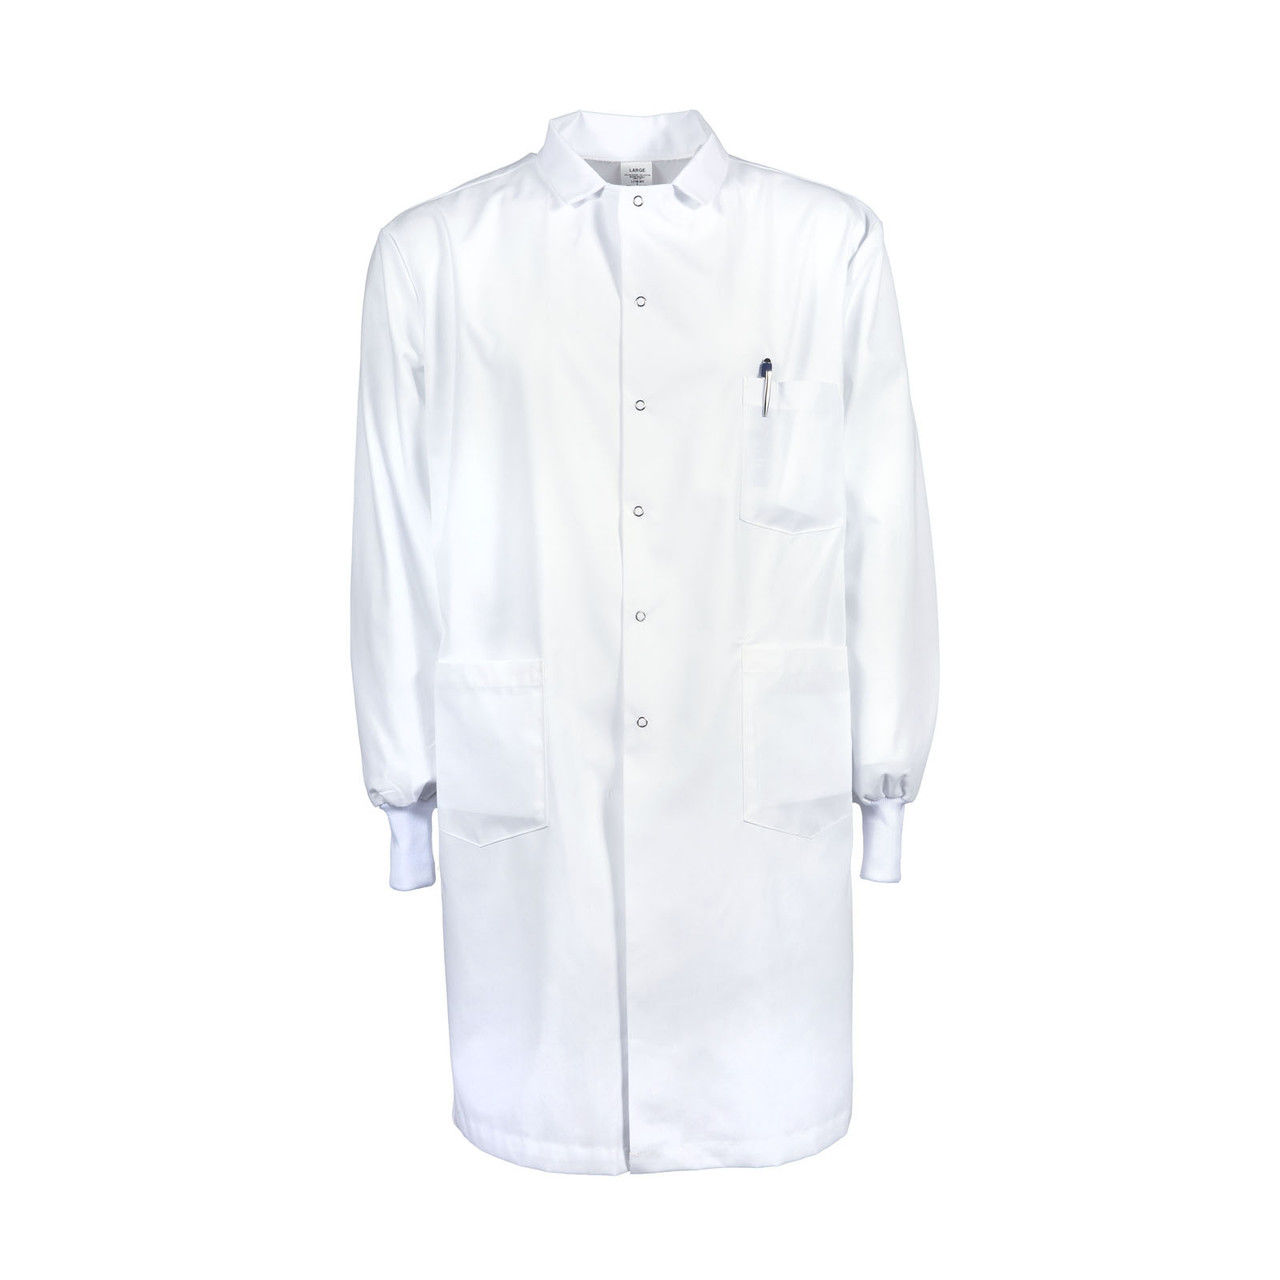 Is the snap button lab coat made of the same material as the Knit Cuff Lab coat?